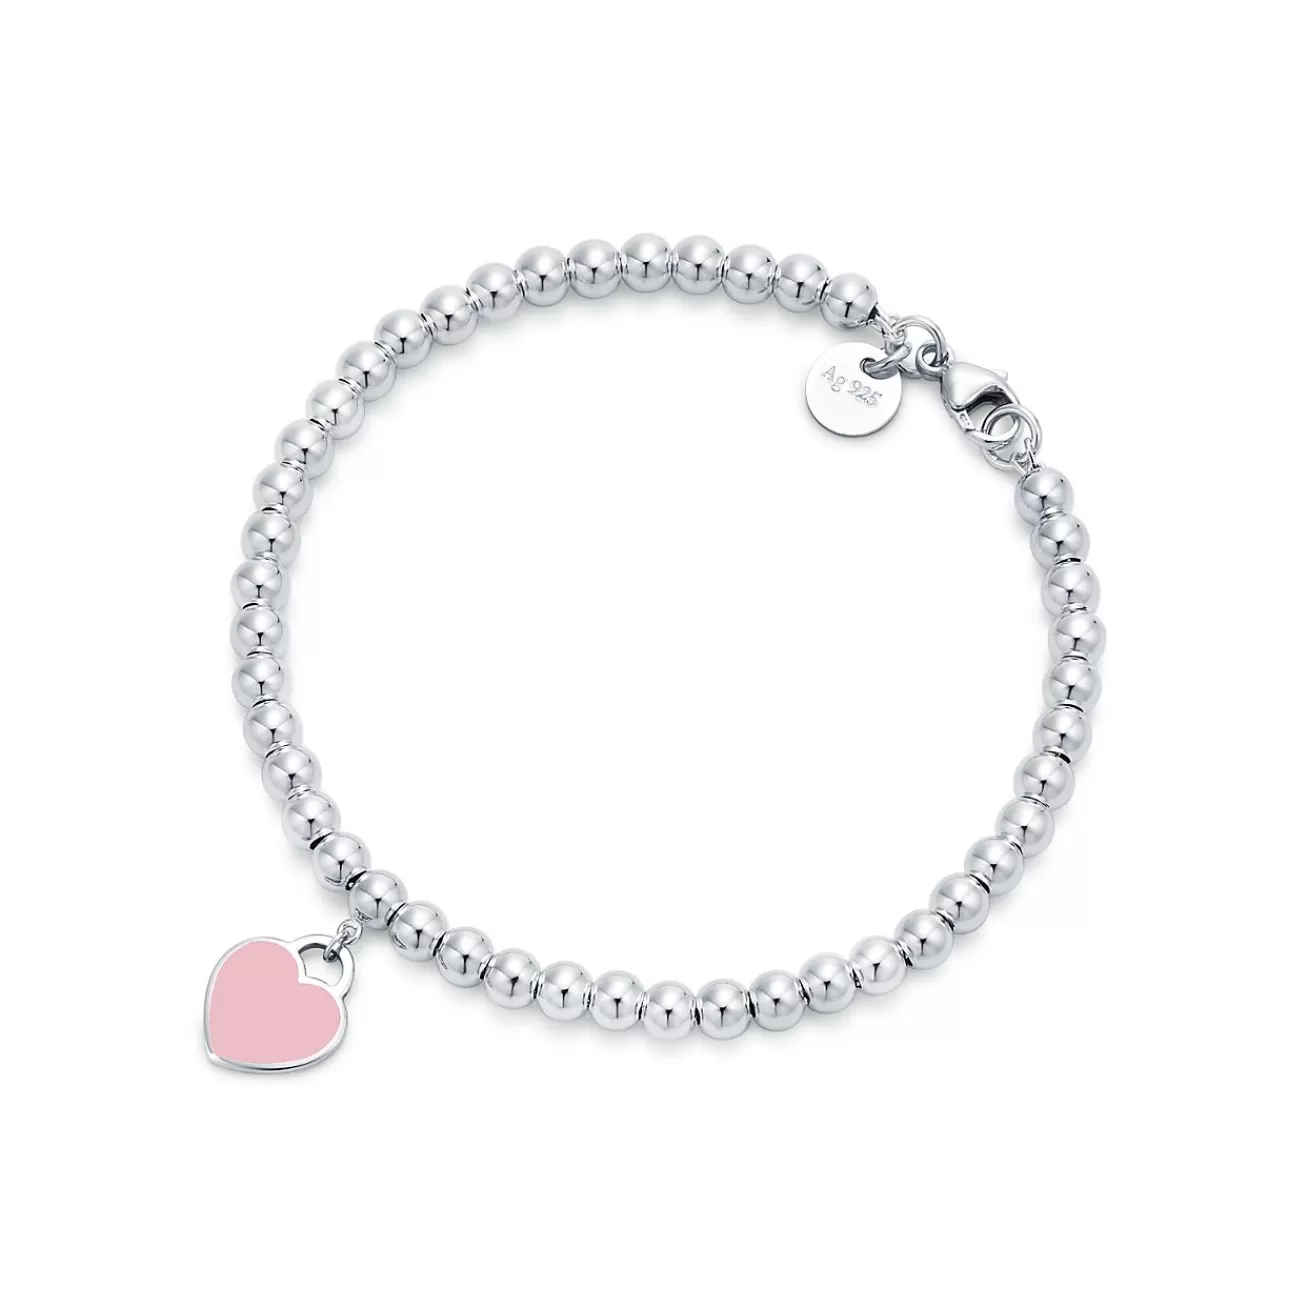 Tiffany & Co. Return to Tiffany® Pink Heart Tag Bead Bracelet in Silver, 4 mm | ^ Bracelets | Gifts for Her